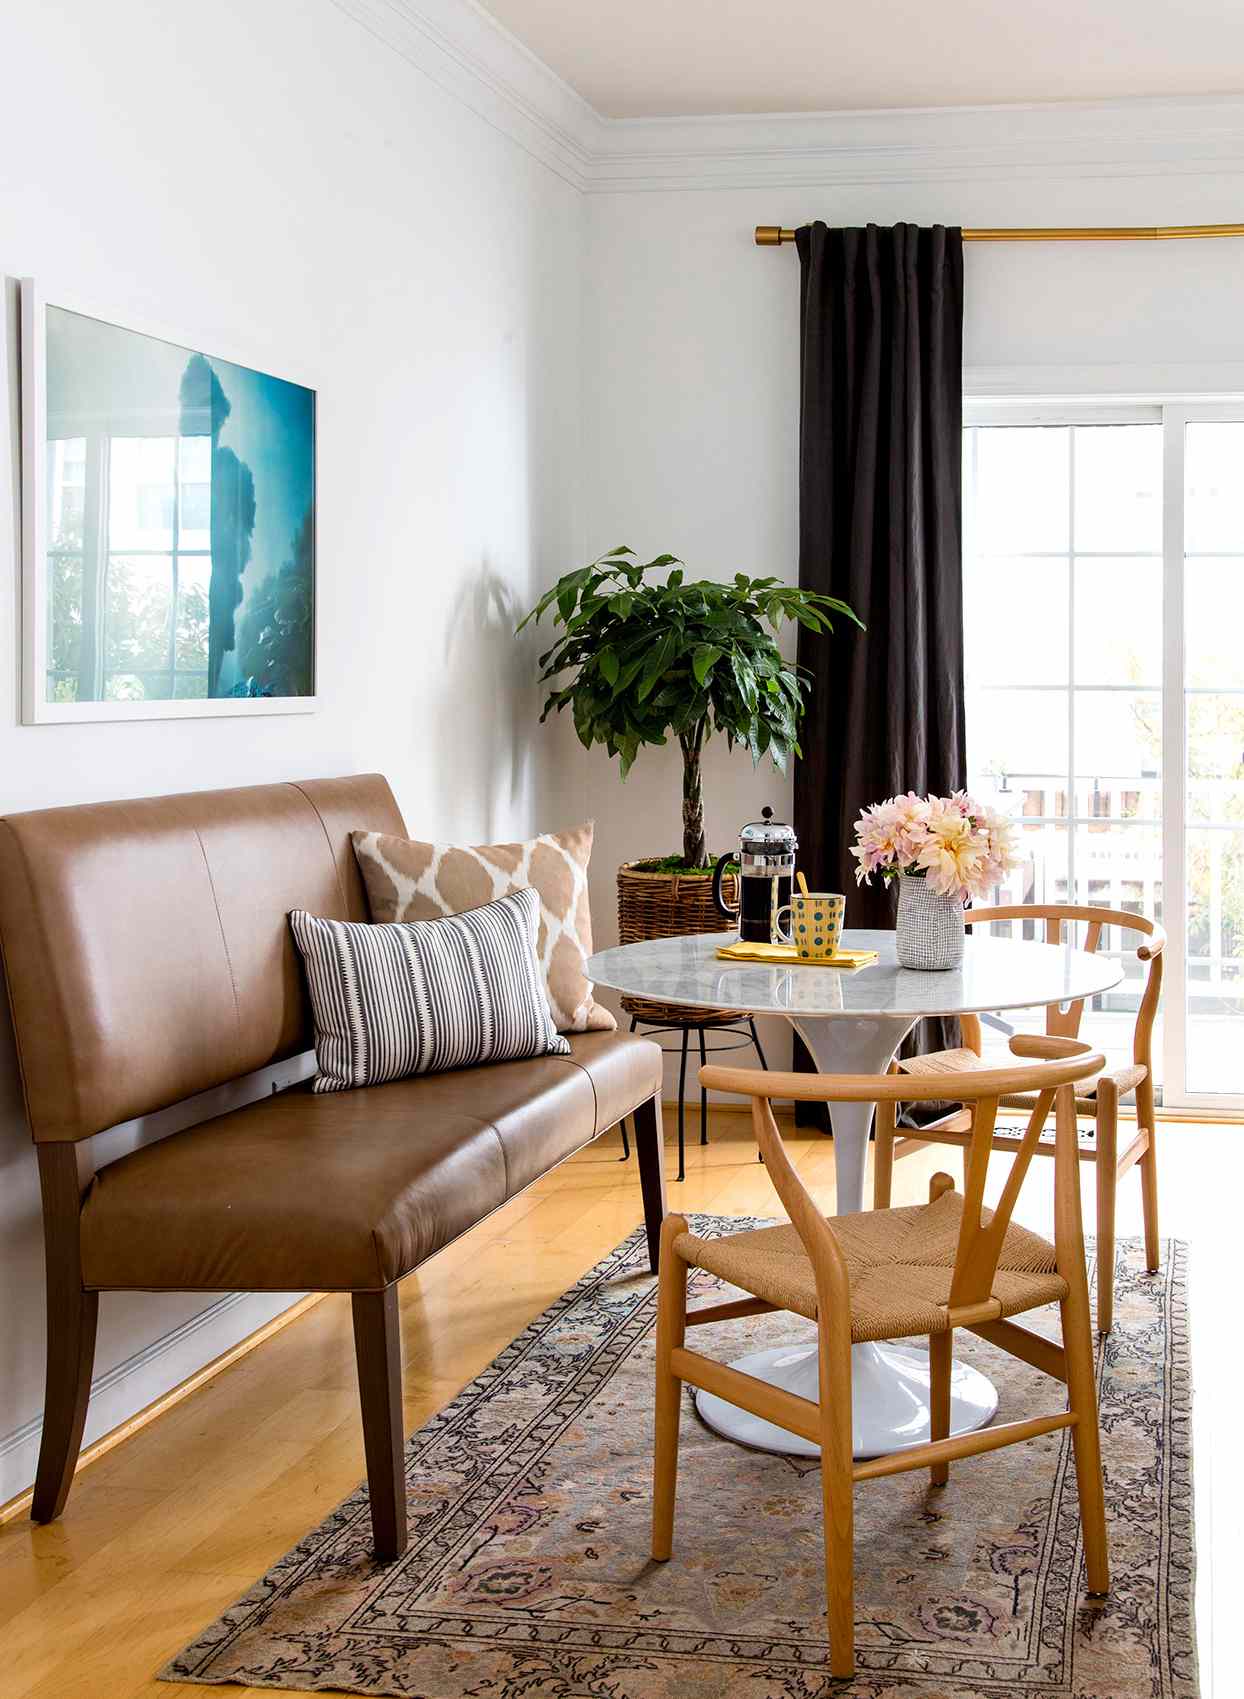 15 Small Dining Room Ideas To Make The, Dining Room Tables For Narrow Spaces